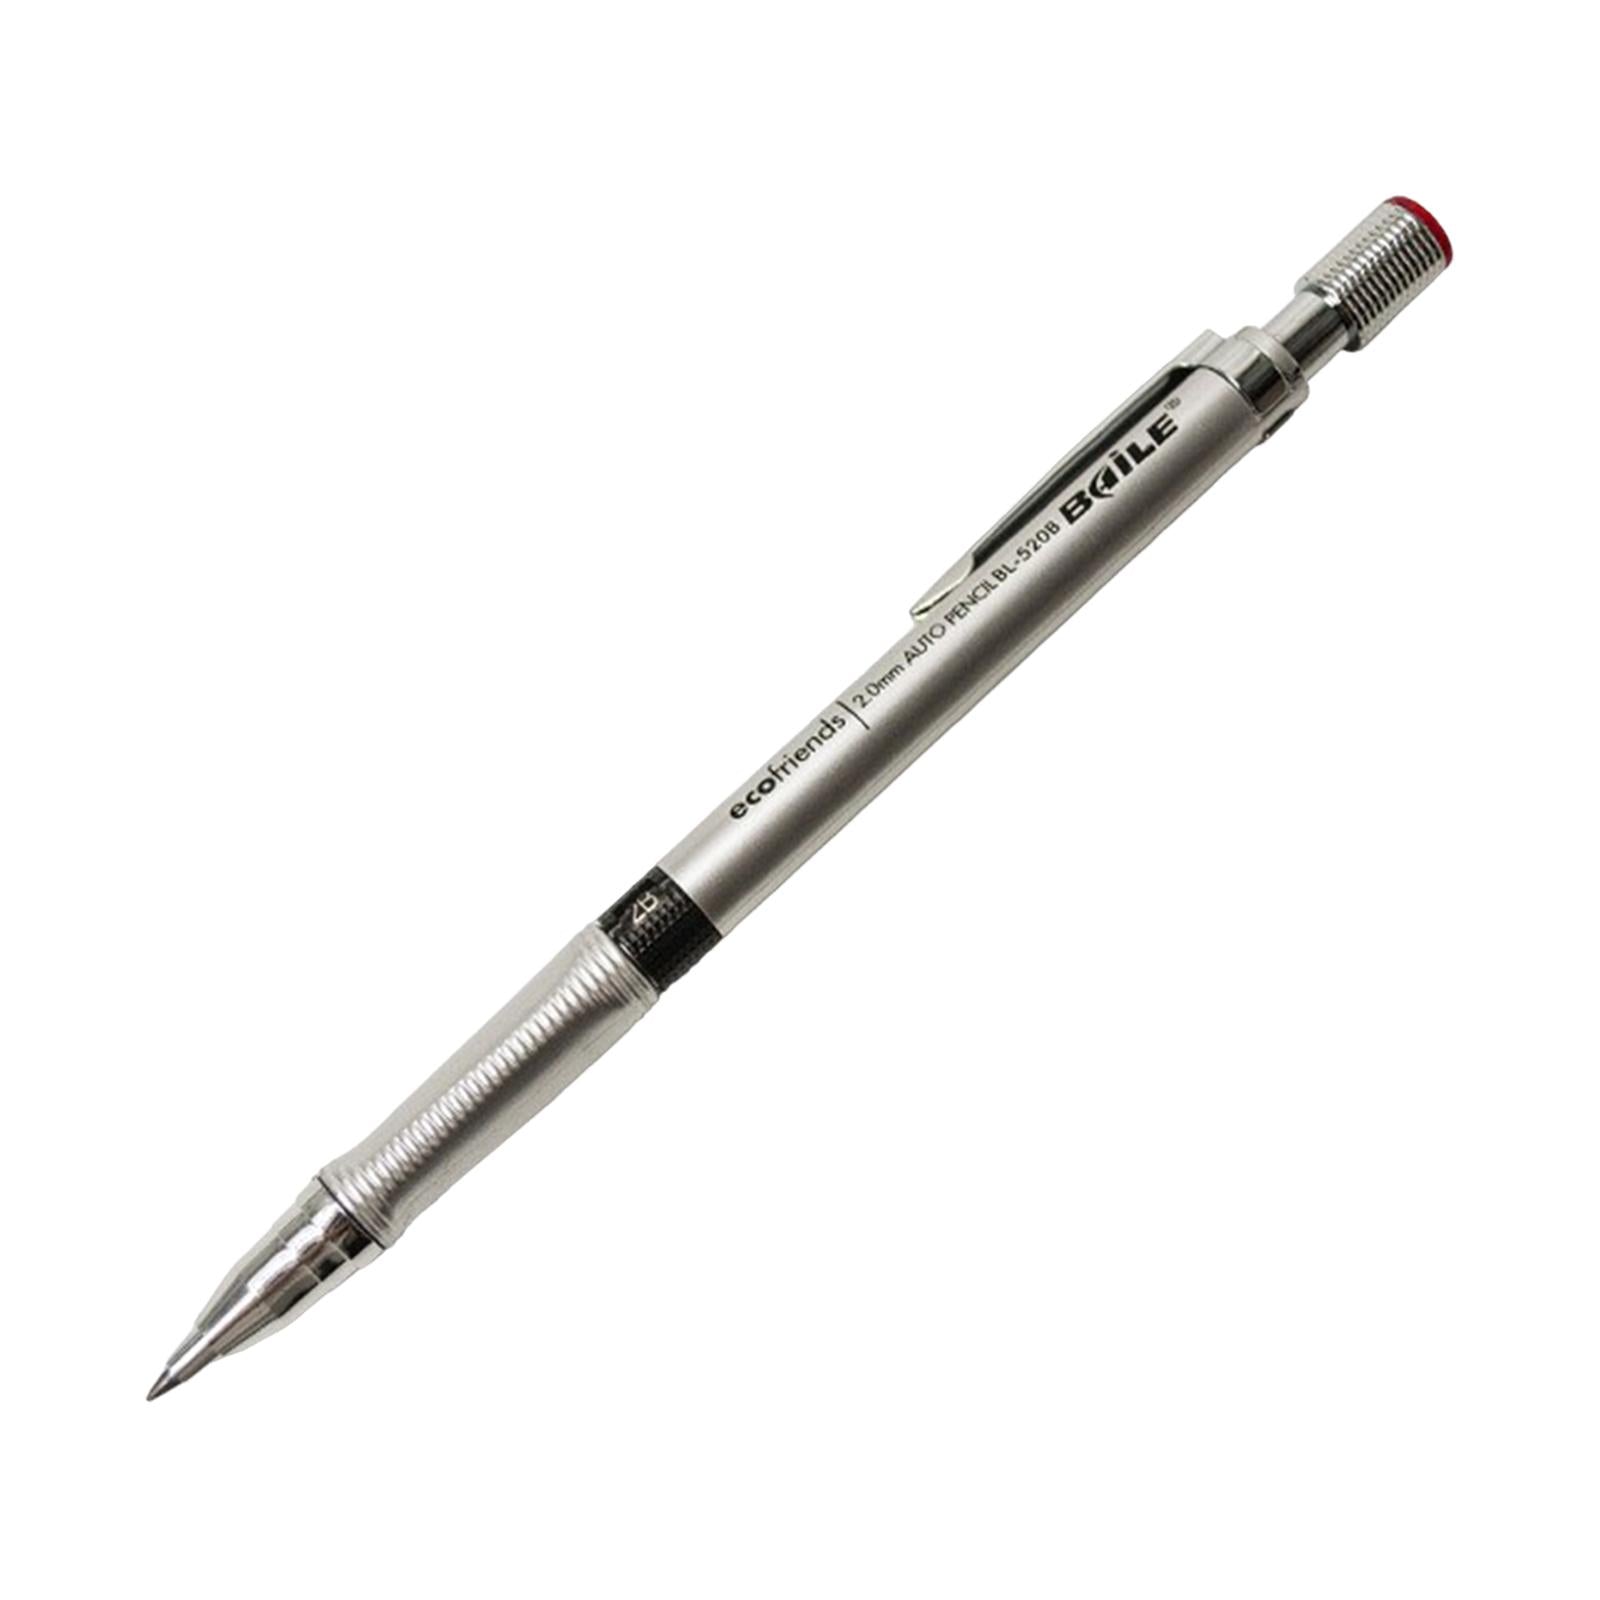 Art Painting Pencils Portable Drafting Pencil for Drafting Writing Sketching Silver